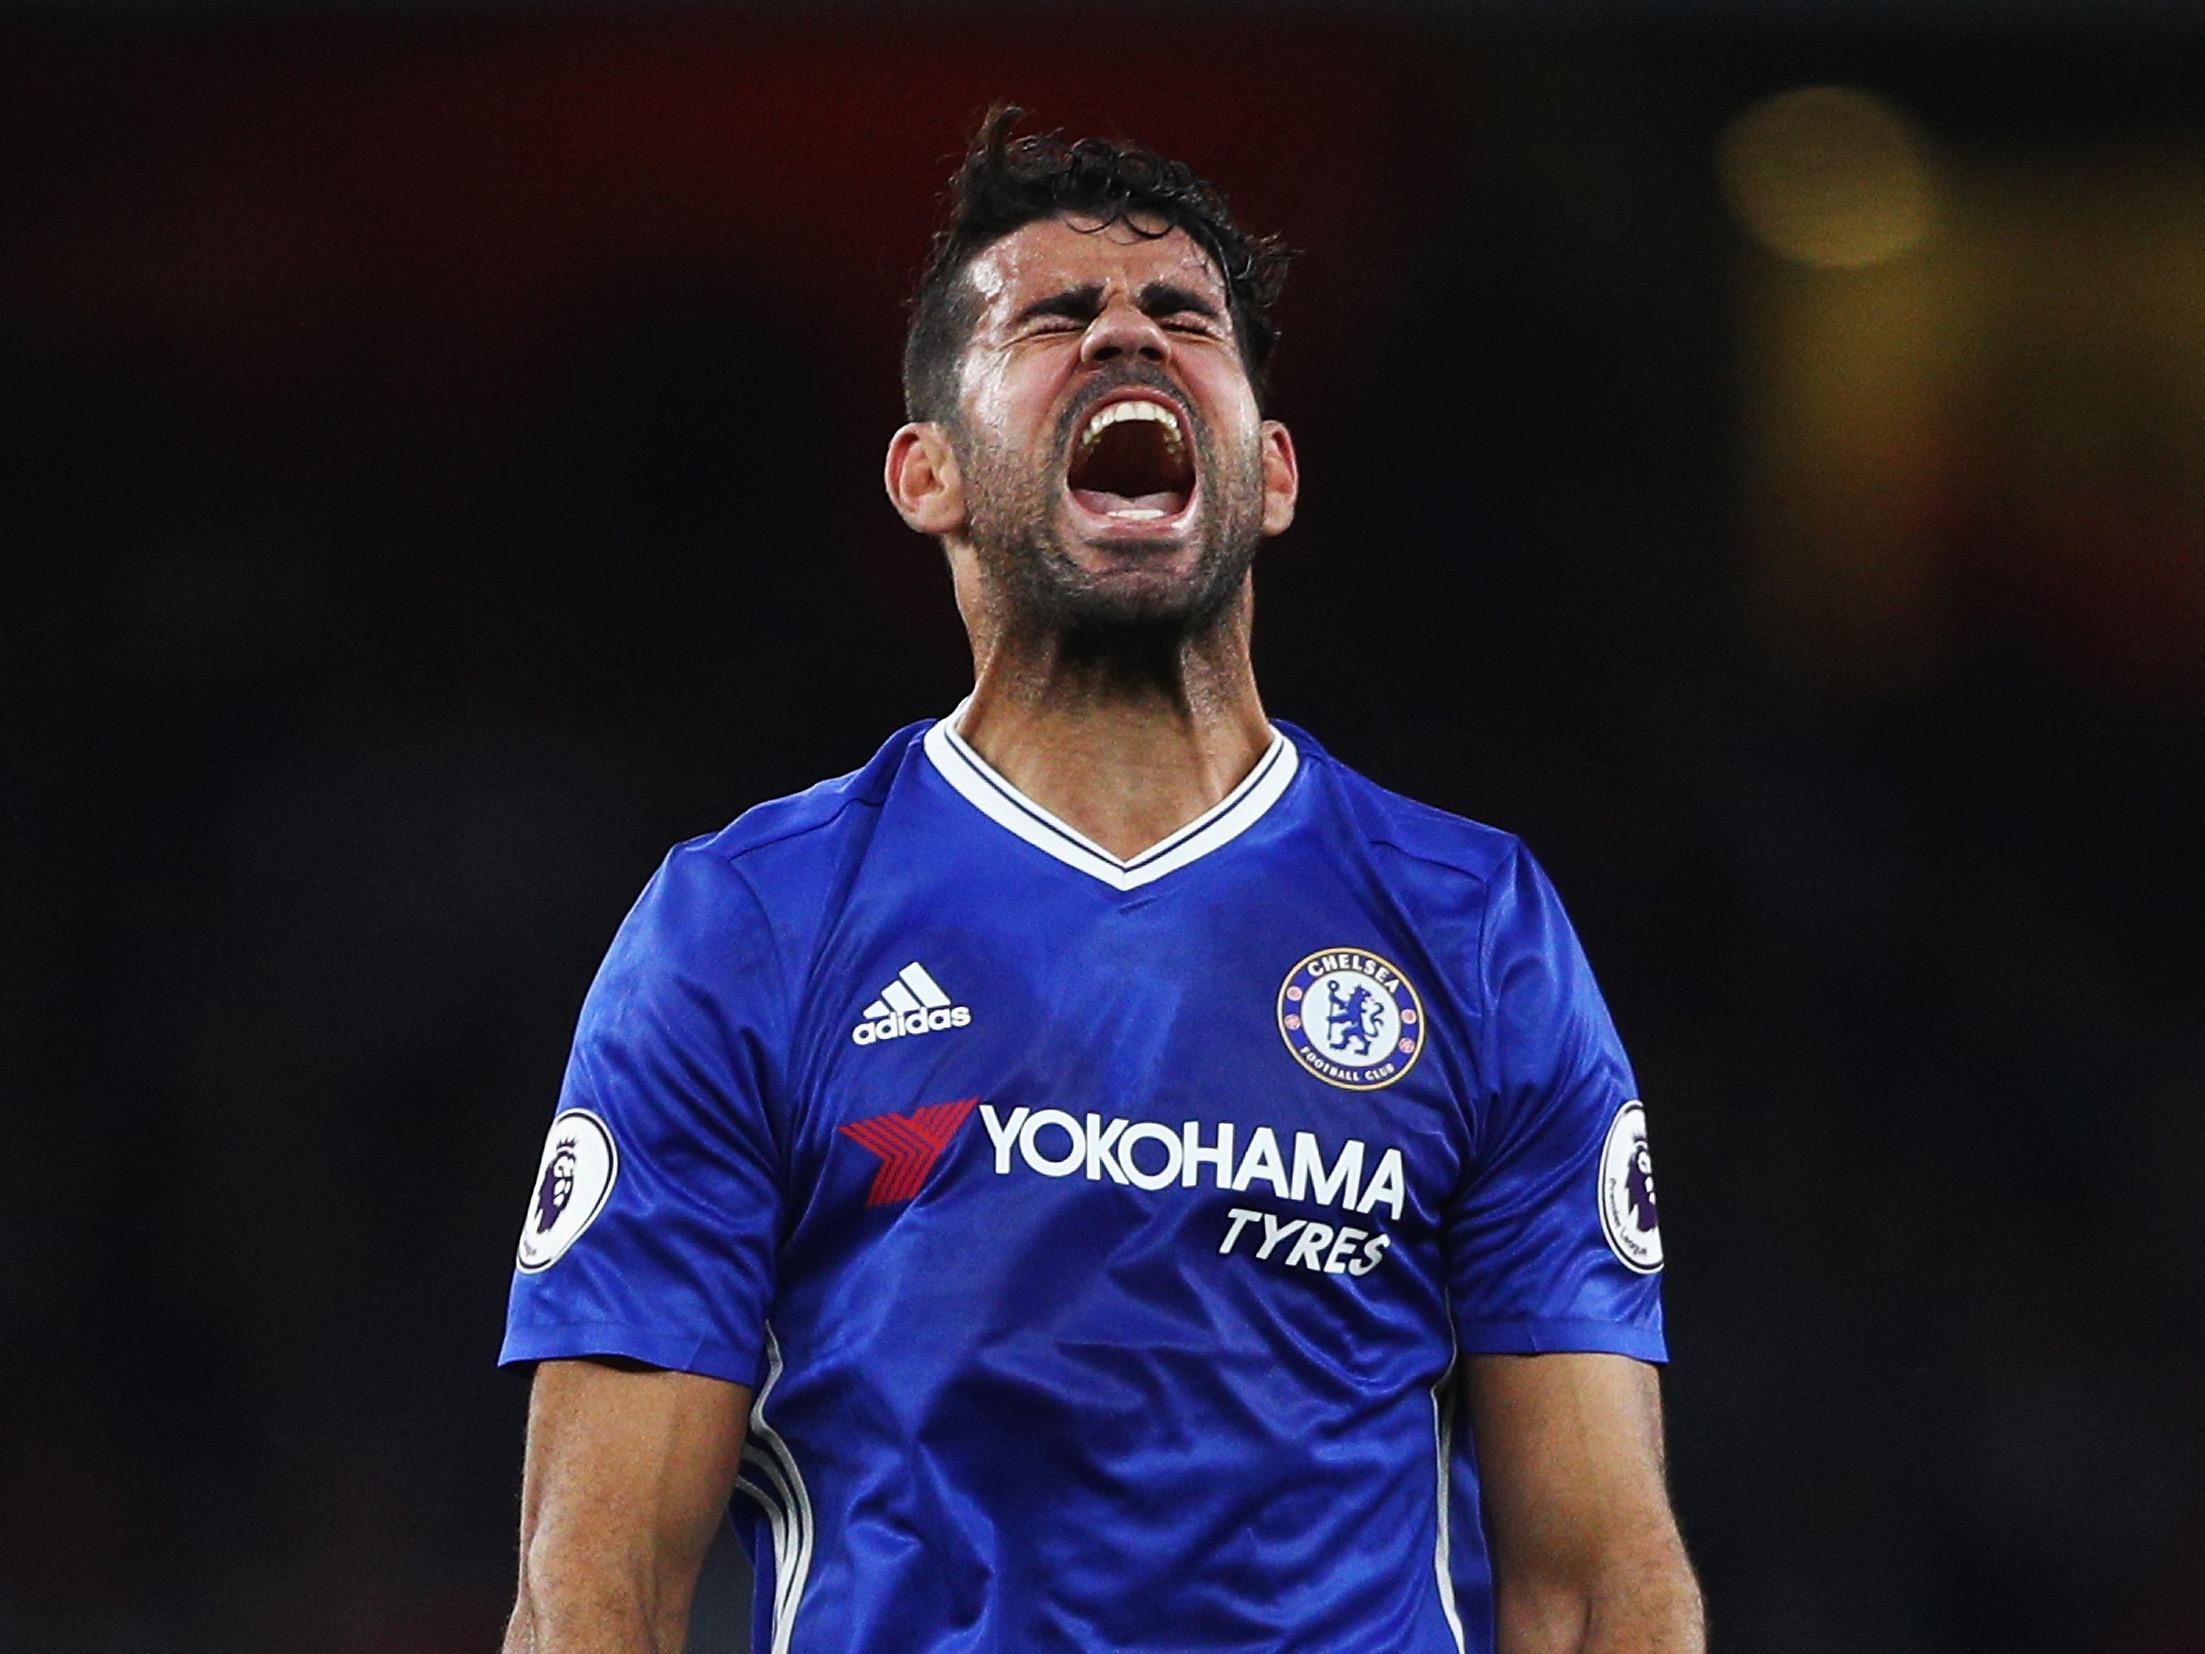 Costa had been desperate to seal a move away from Chelsea